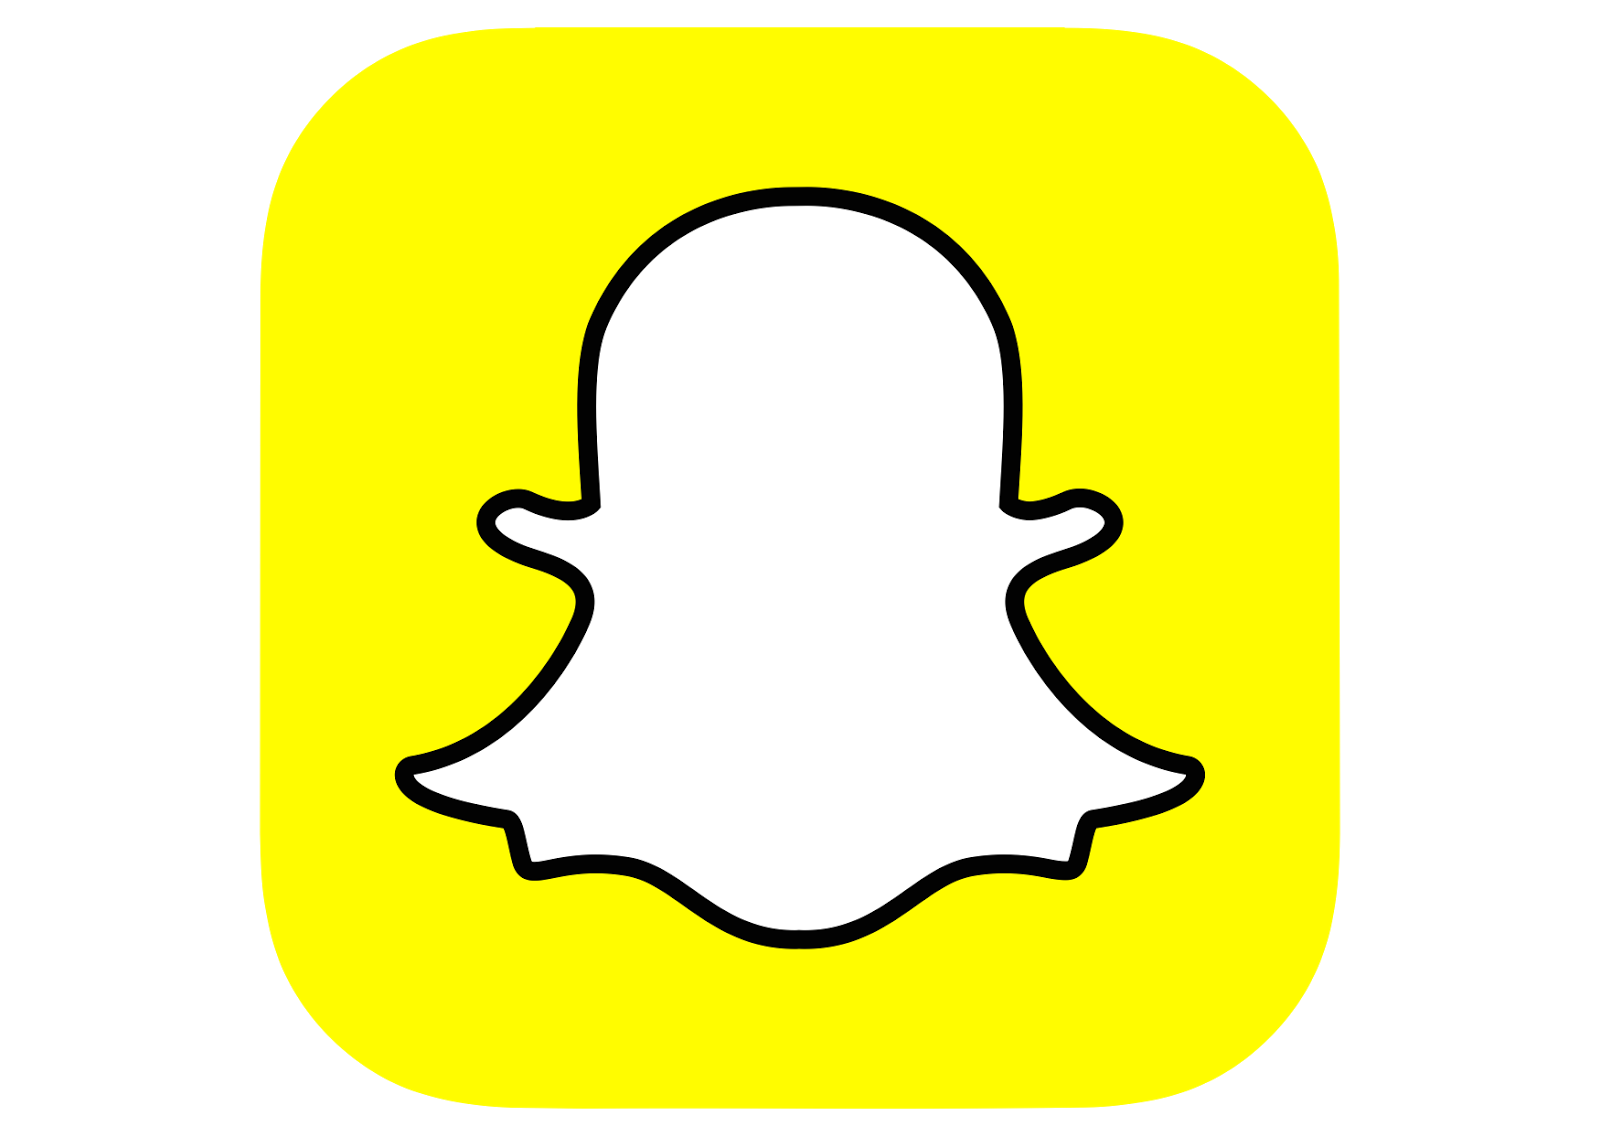 Have You Heard of Snapchat? - Alliance For Safe Kids